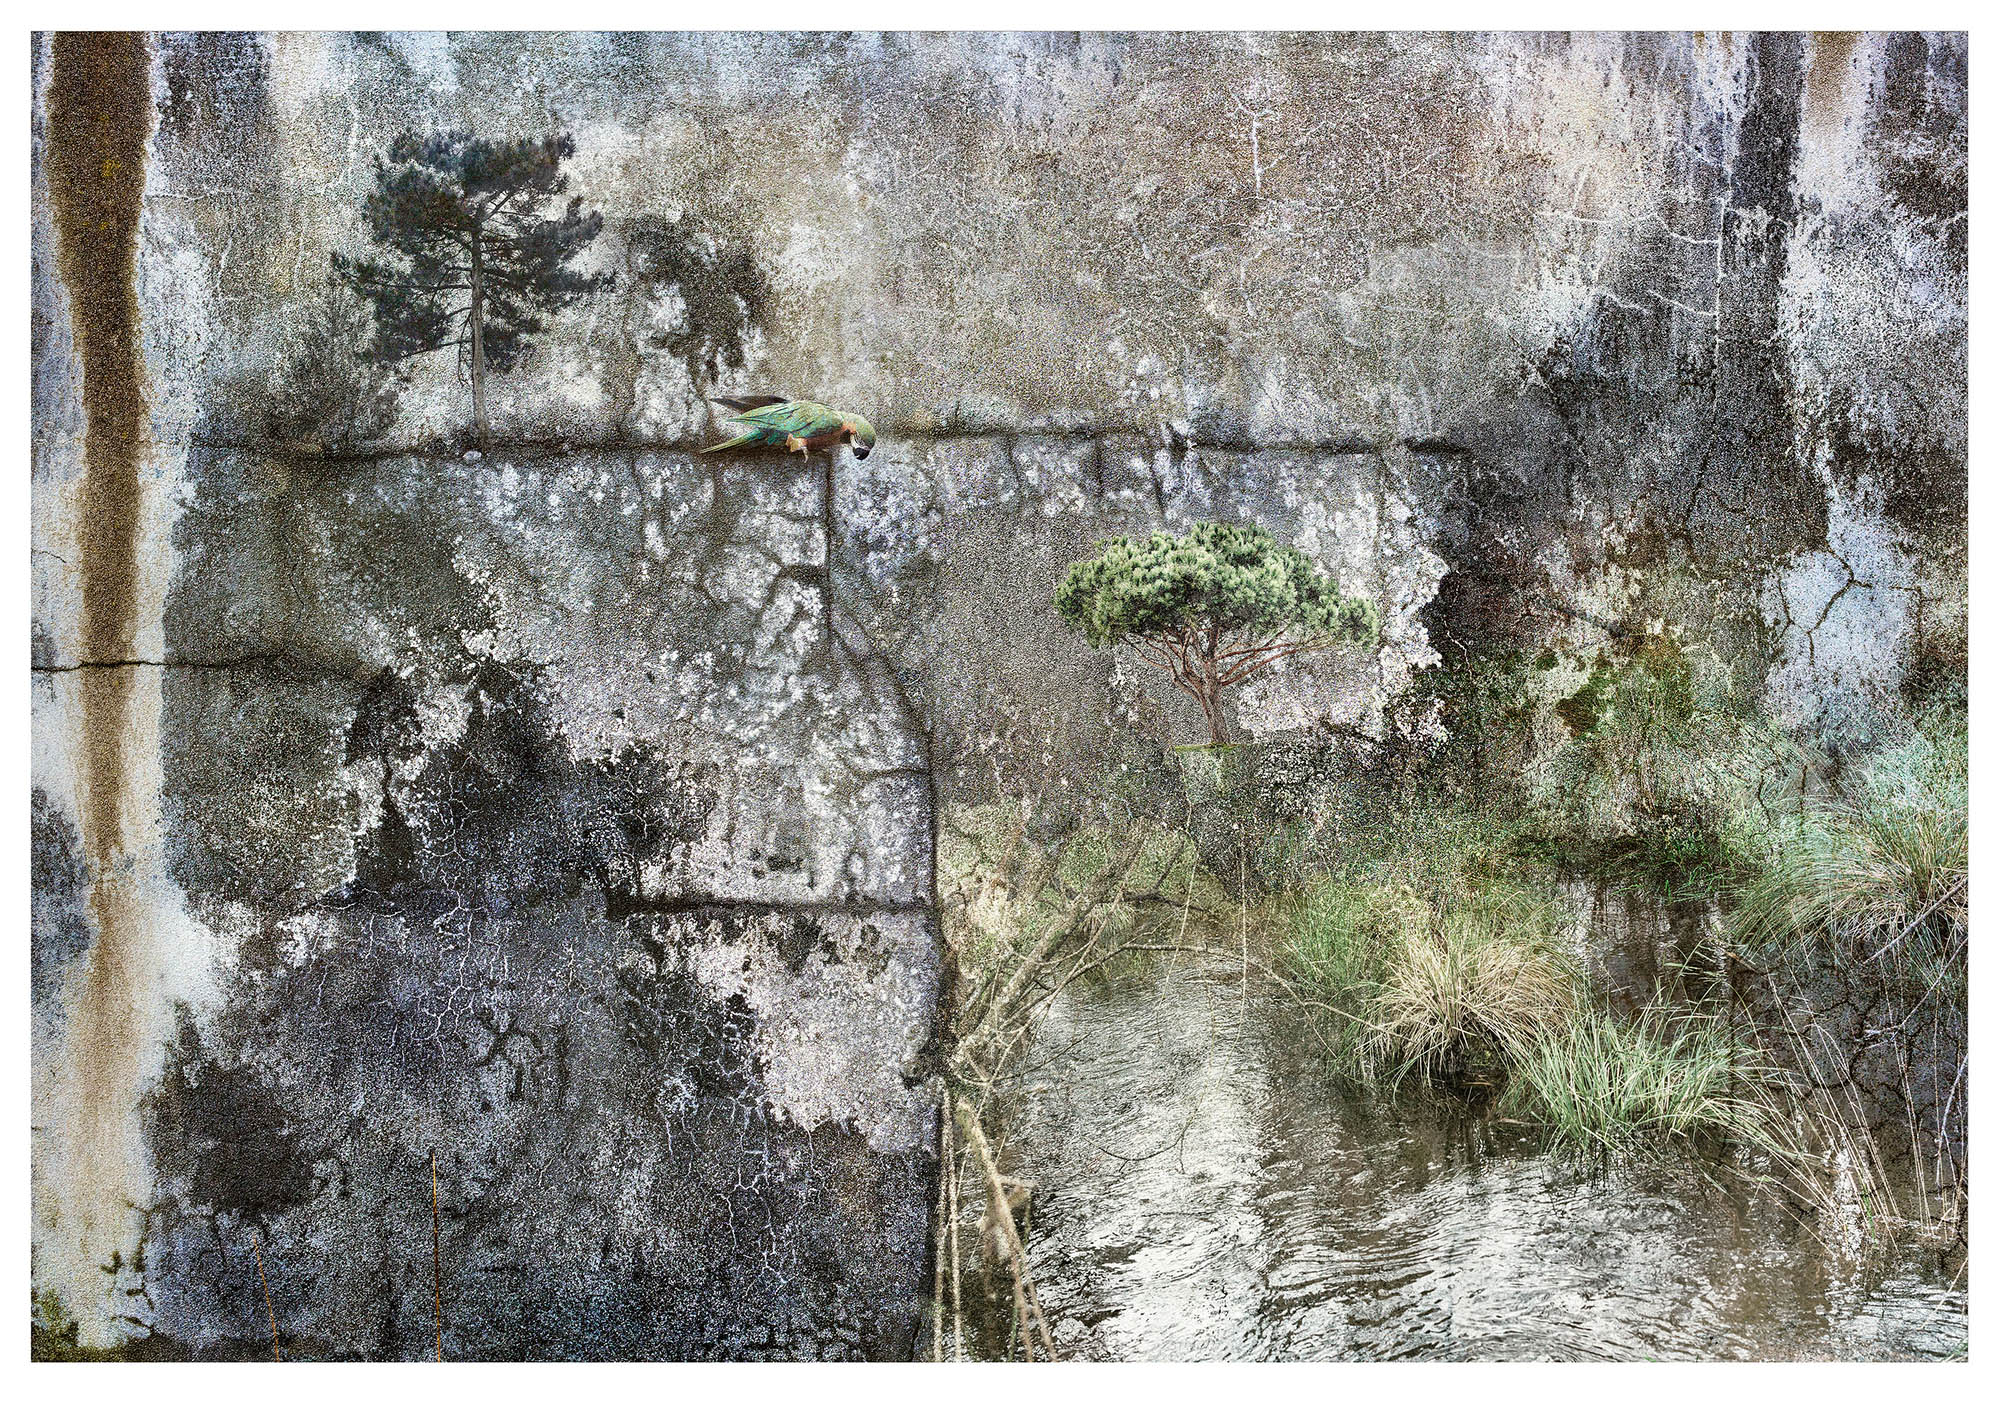 Composite photograph of distressed wall, trees and  a stream to form a surrreal landscape